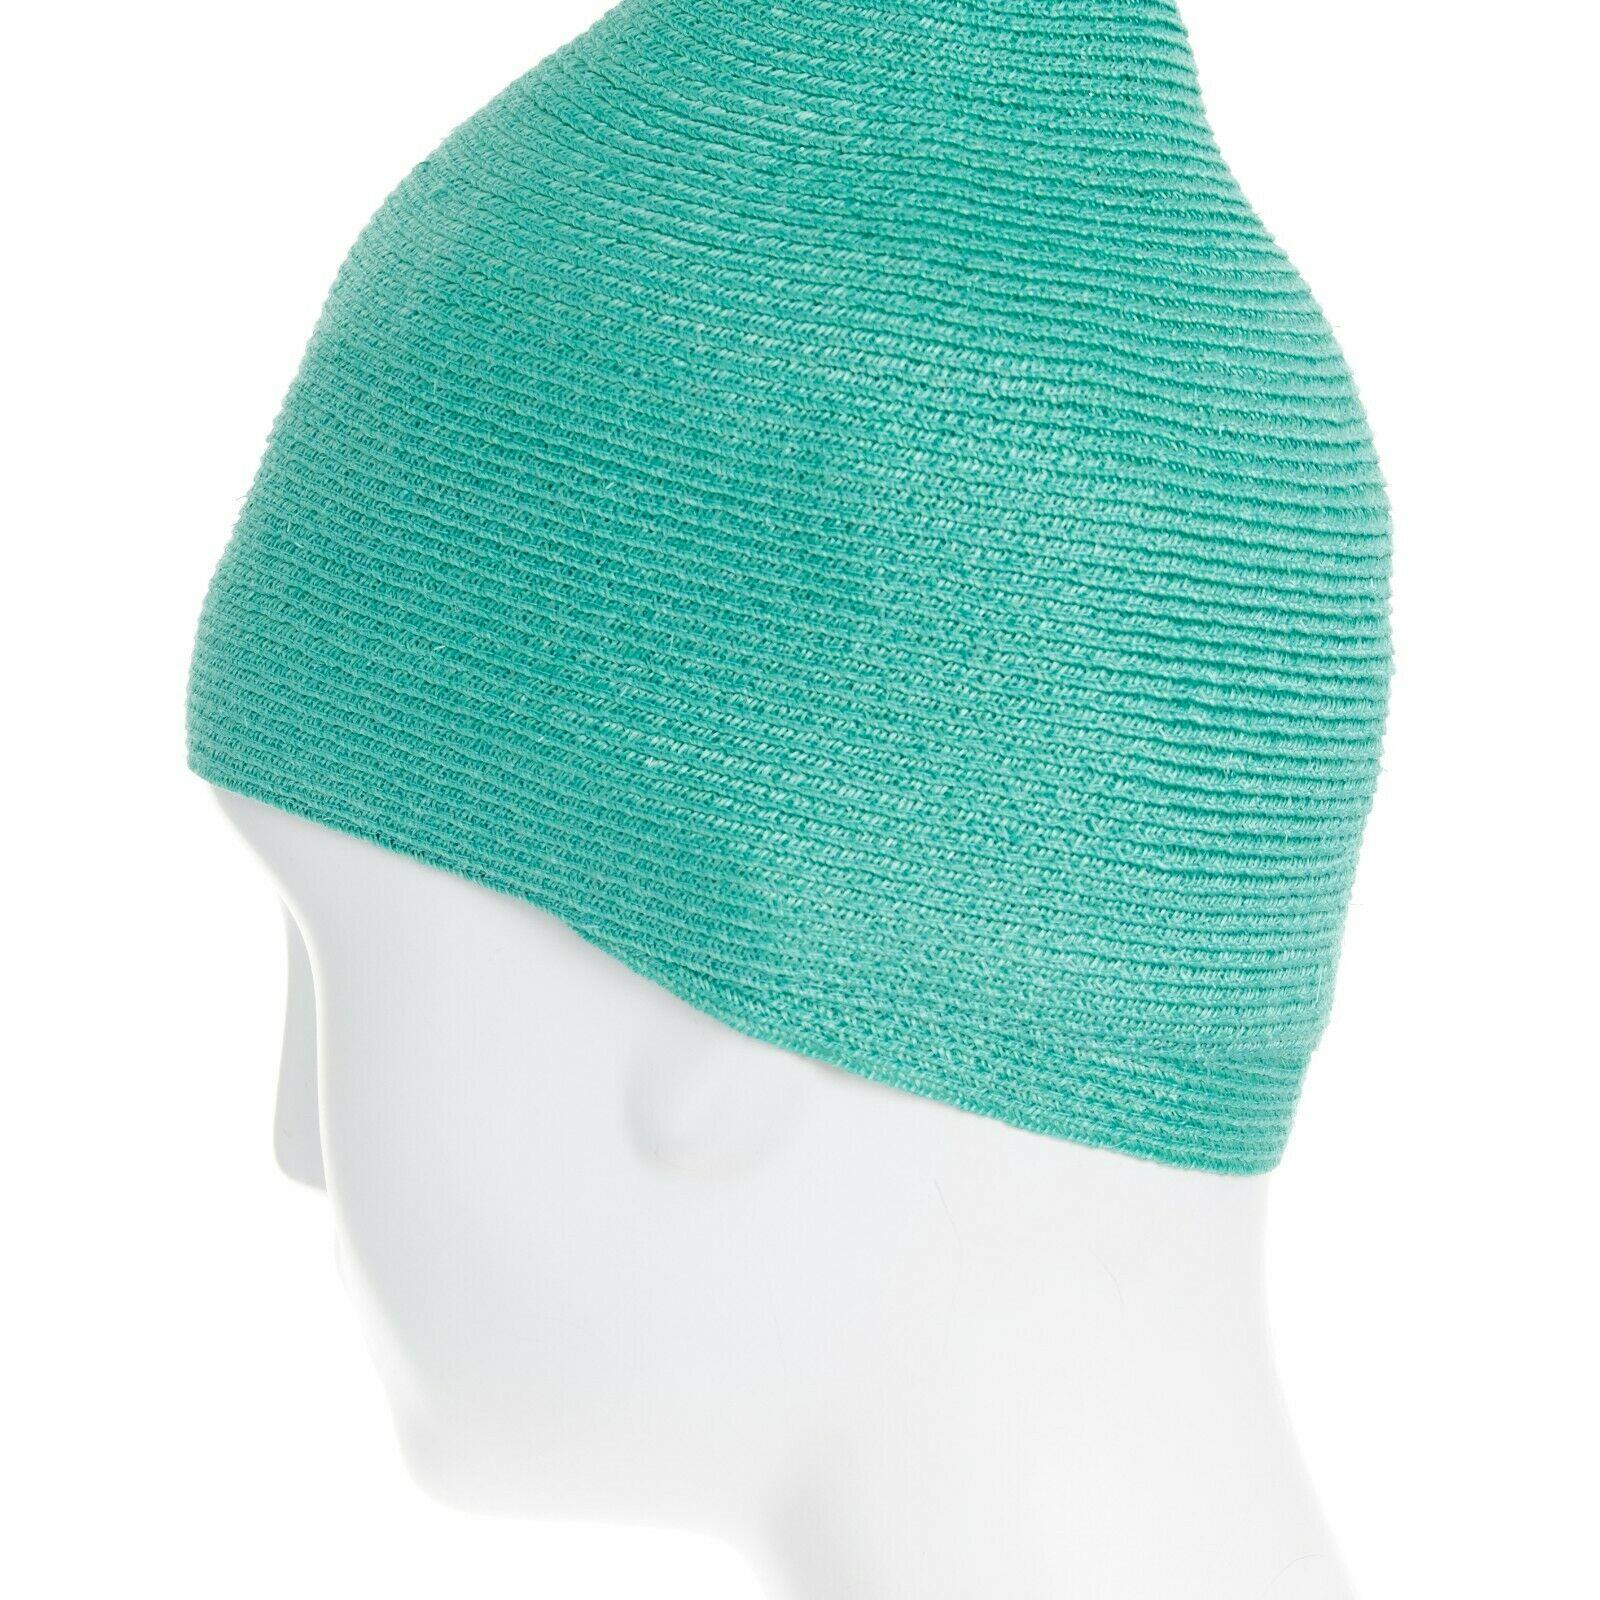 Green ISSEY MIYAKE PLEATS PLEASE teal green raffia straw woven pointed moroccan hat